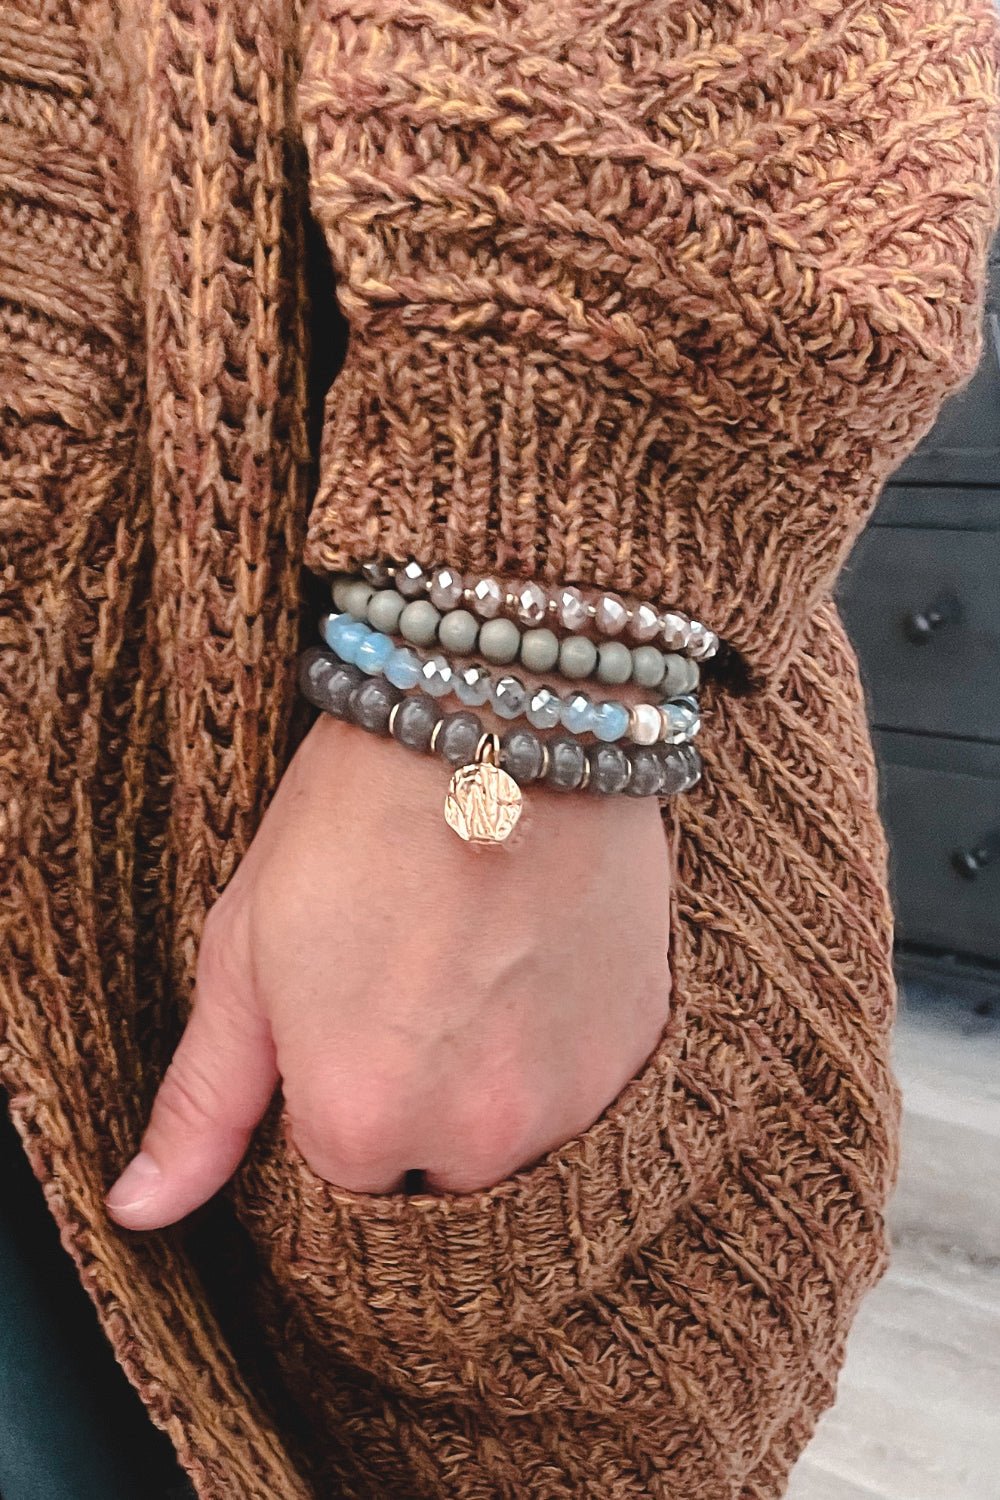 Boho Chic Stackable Beaded Bracelets in Grey - Bracelets - Blooming Daily